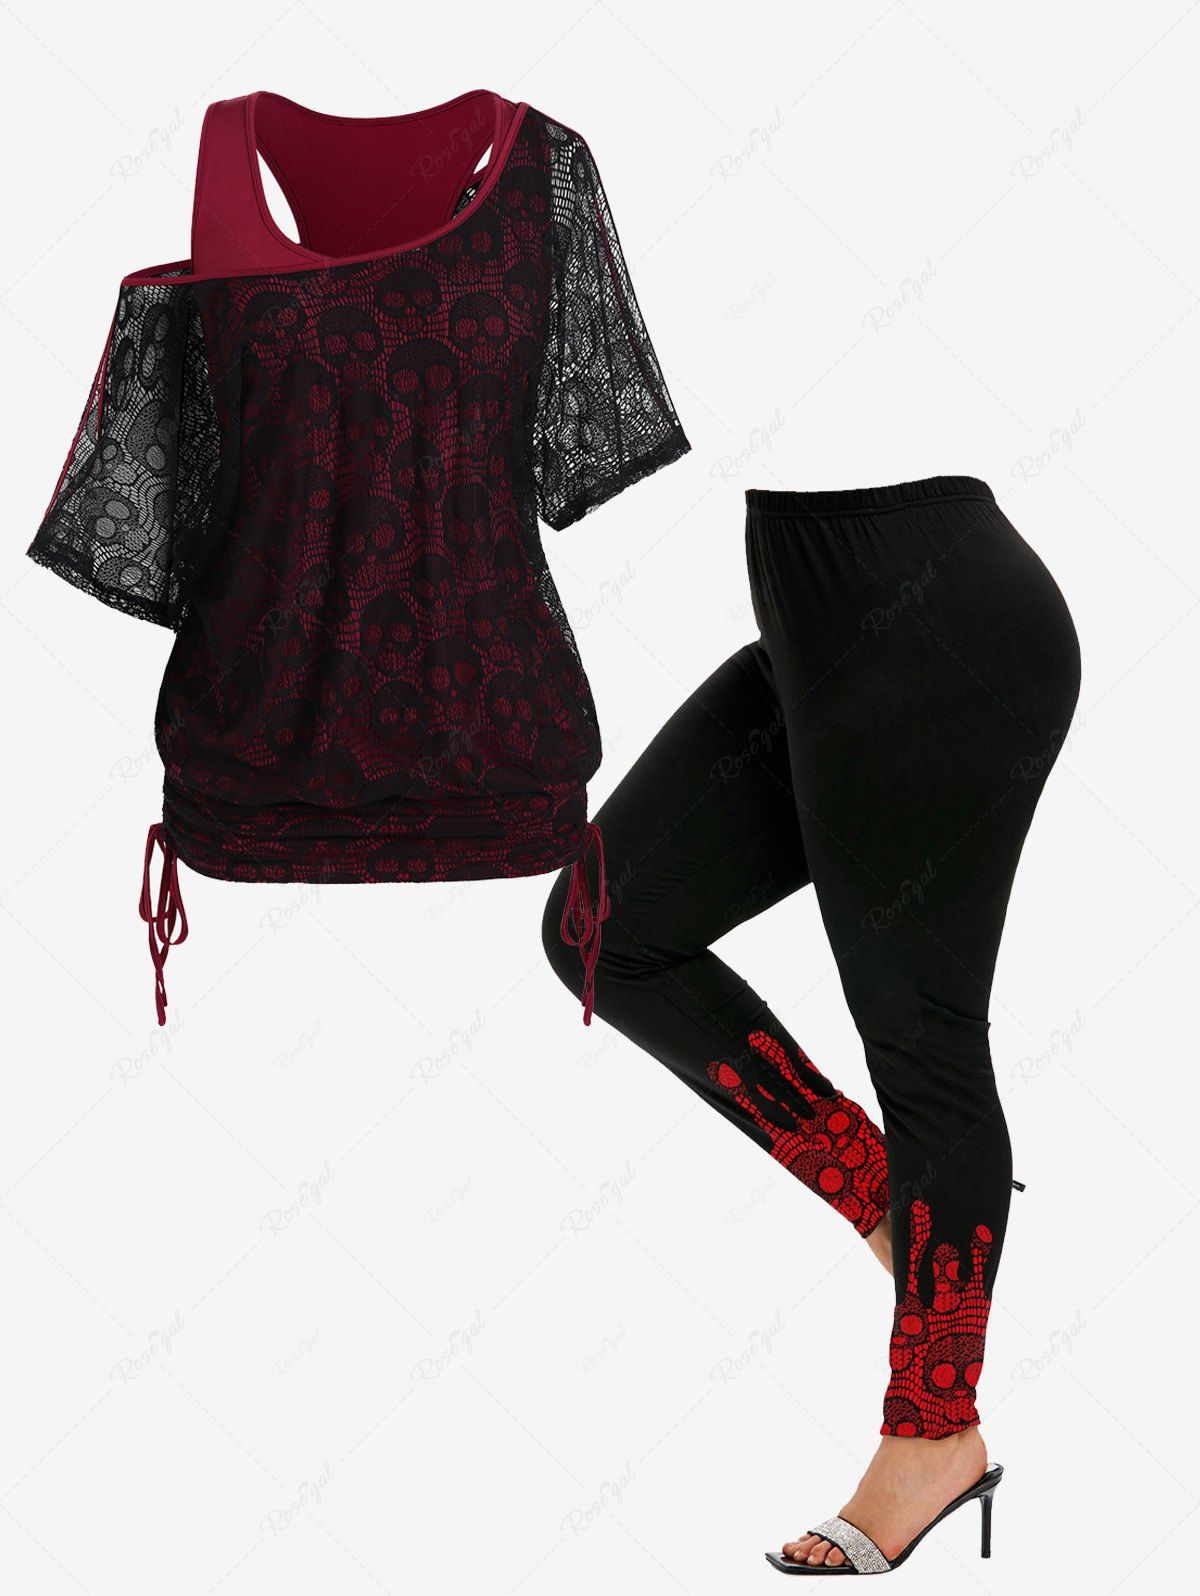 Sale Gothic Skew Neck Skull Lace Cinched Faux Tee and Gothic Skull Lace Print Skinny Leggings Outfit  